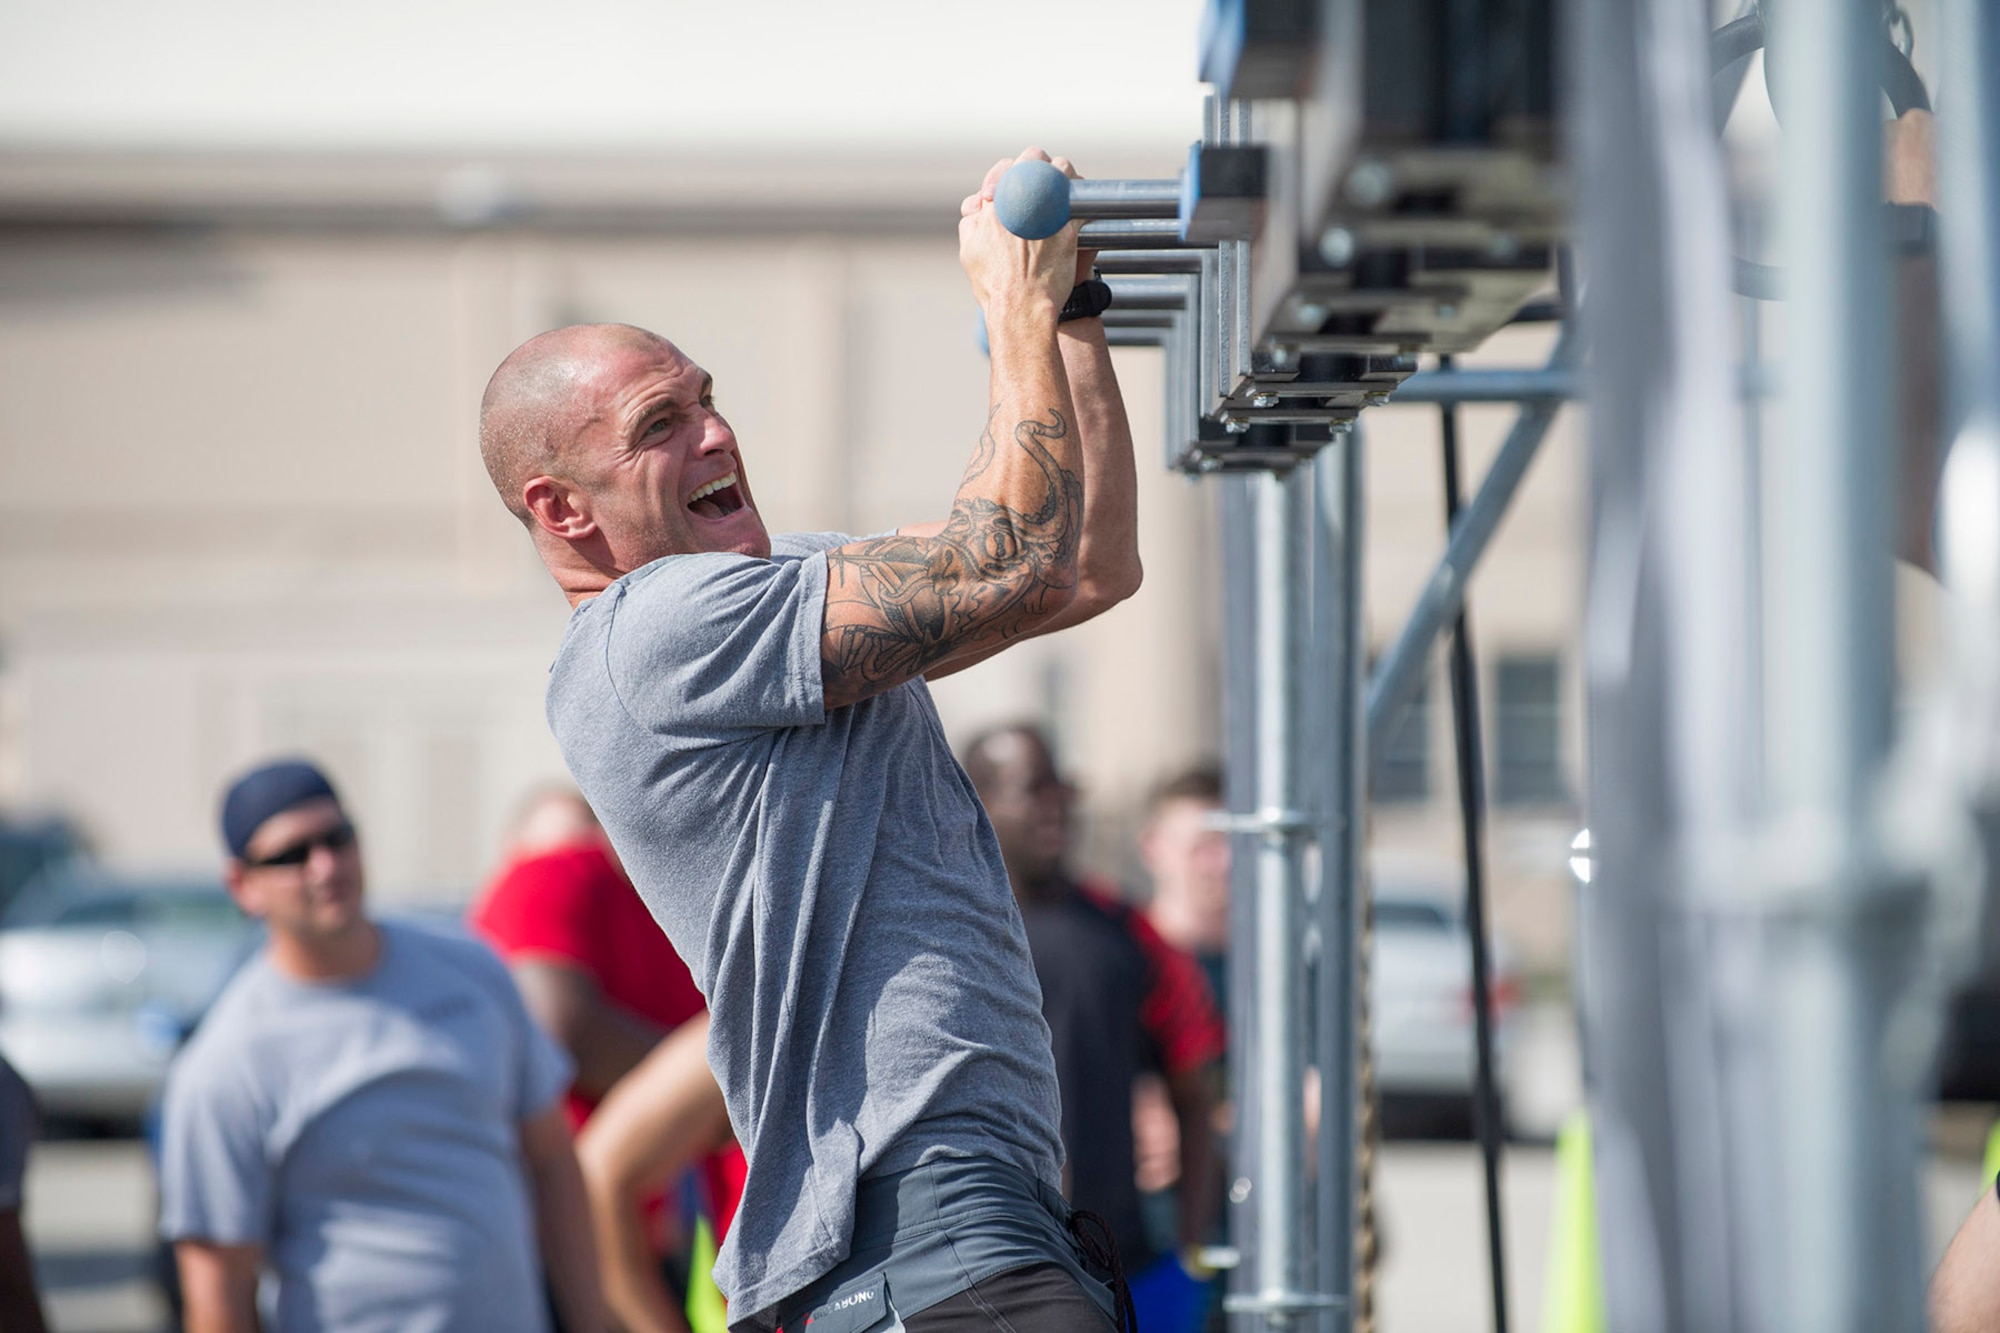 Master Sgt. William Posch, 308th Rescue Squadron pararescueman, works his way through the Alpha Warrior Course April 22, 2017 set up at Patrick Air Force Base, Florida. American Ninja Warrior stars Barclay Stockett and Brent Steffensen hosted the event which included a variety of obstacles to test competitors’ upper body strength and agility. Close to 40 people stepped up to the challenge while a crowd of spectators cheered them on. (U.S. Air Force photo/Phillip Sunkel)